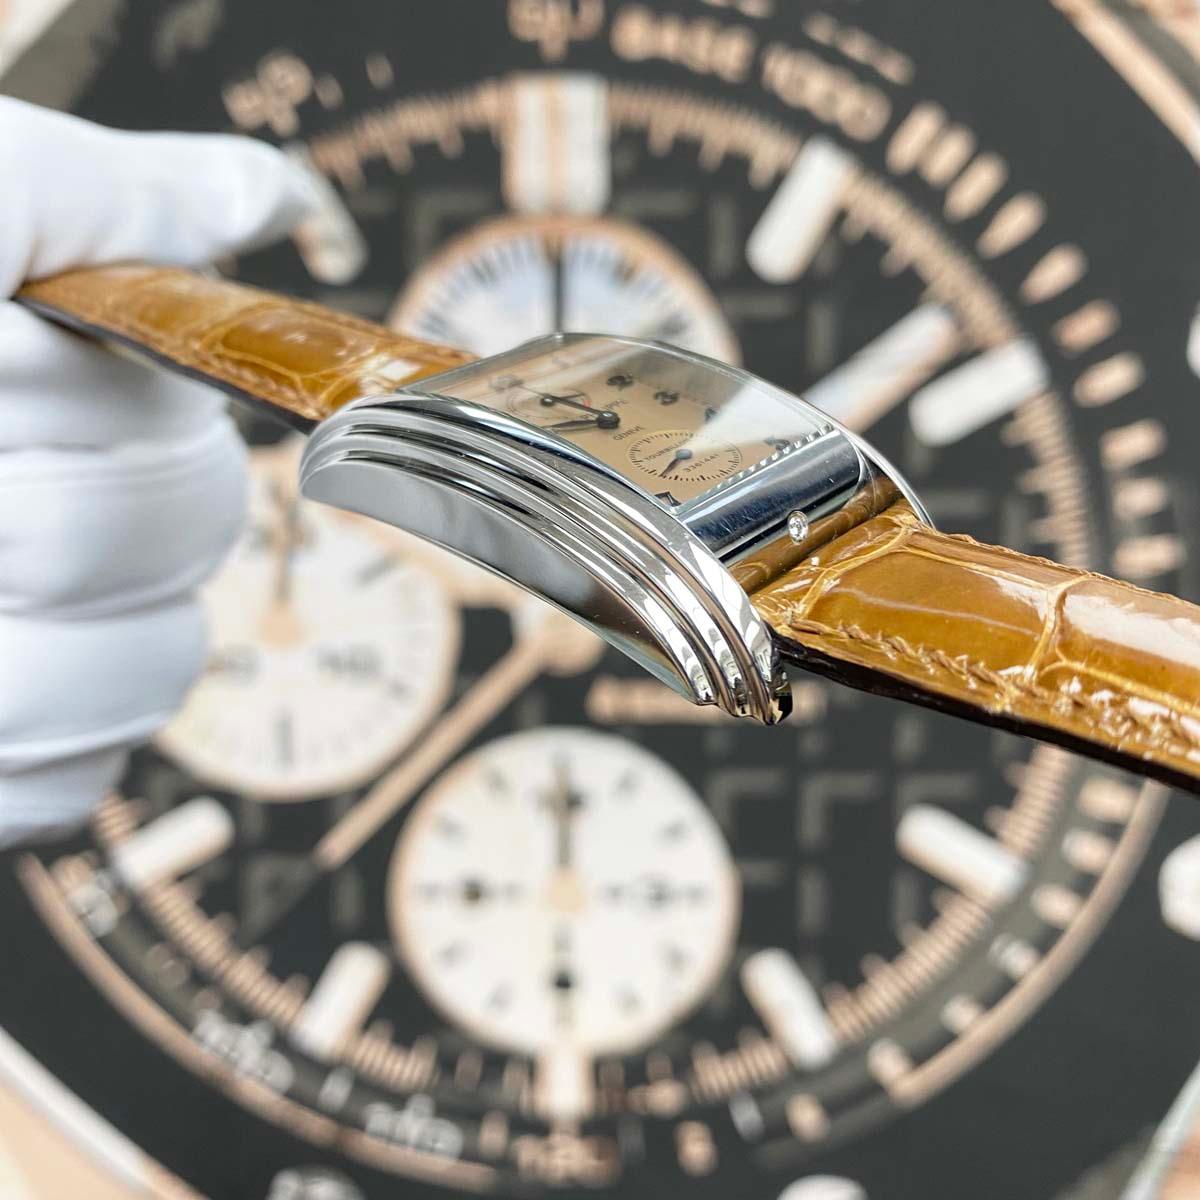 Patek Philippe Tiffany Papers Mint Tourbillon Grand Complications 5101P-010 Salmon Dial Platinum Pre-Owned - Gotham Trading 